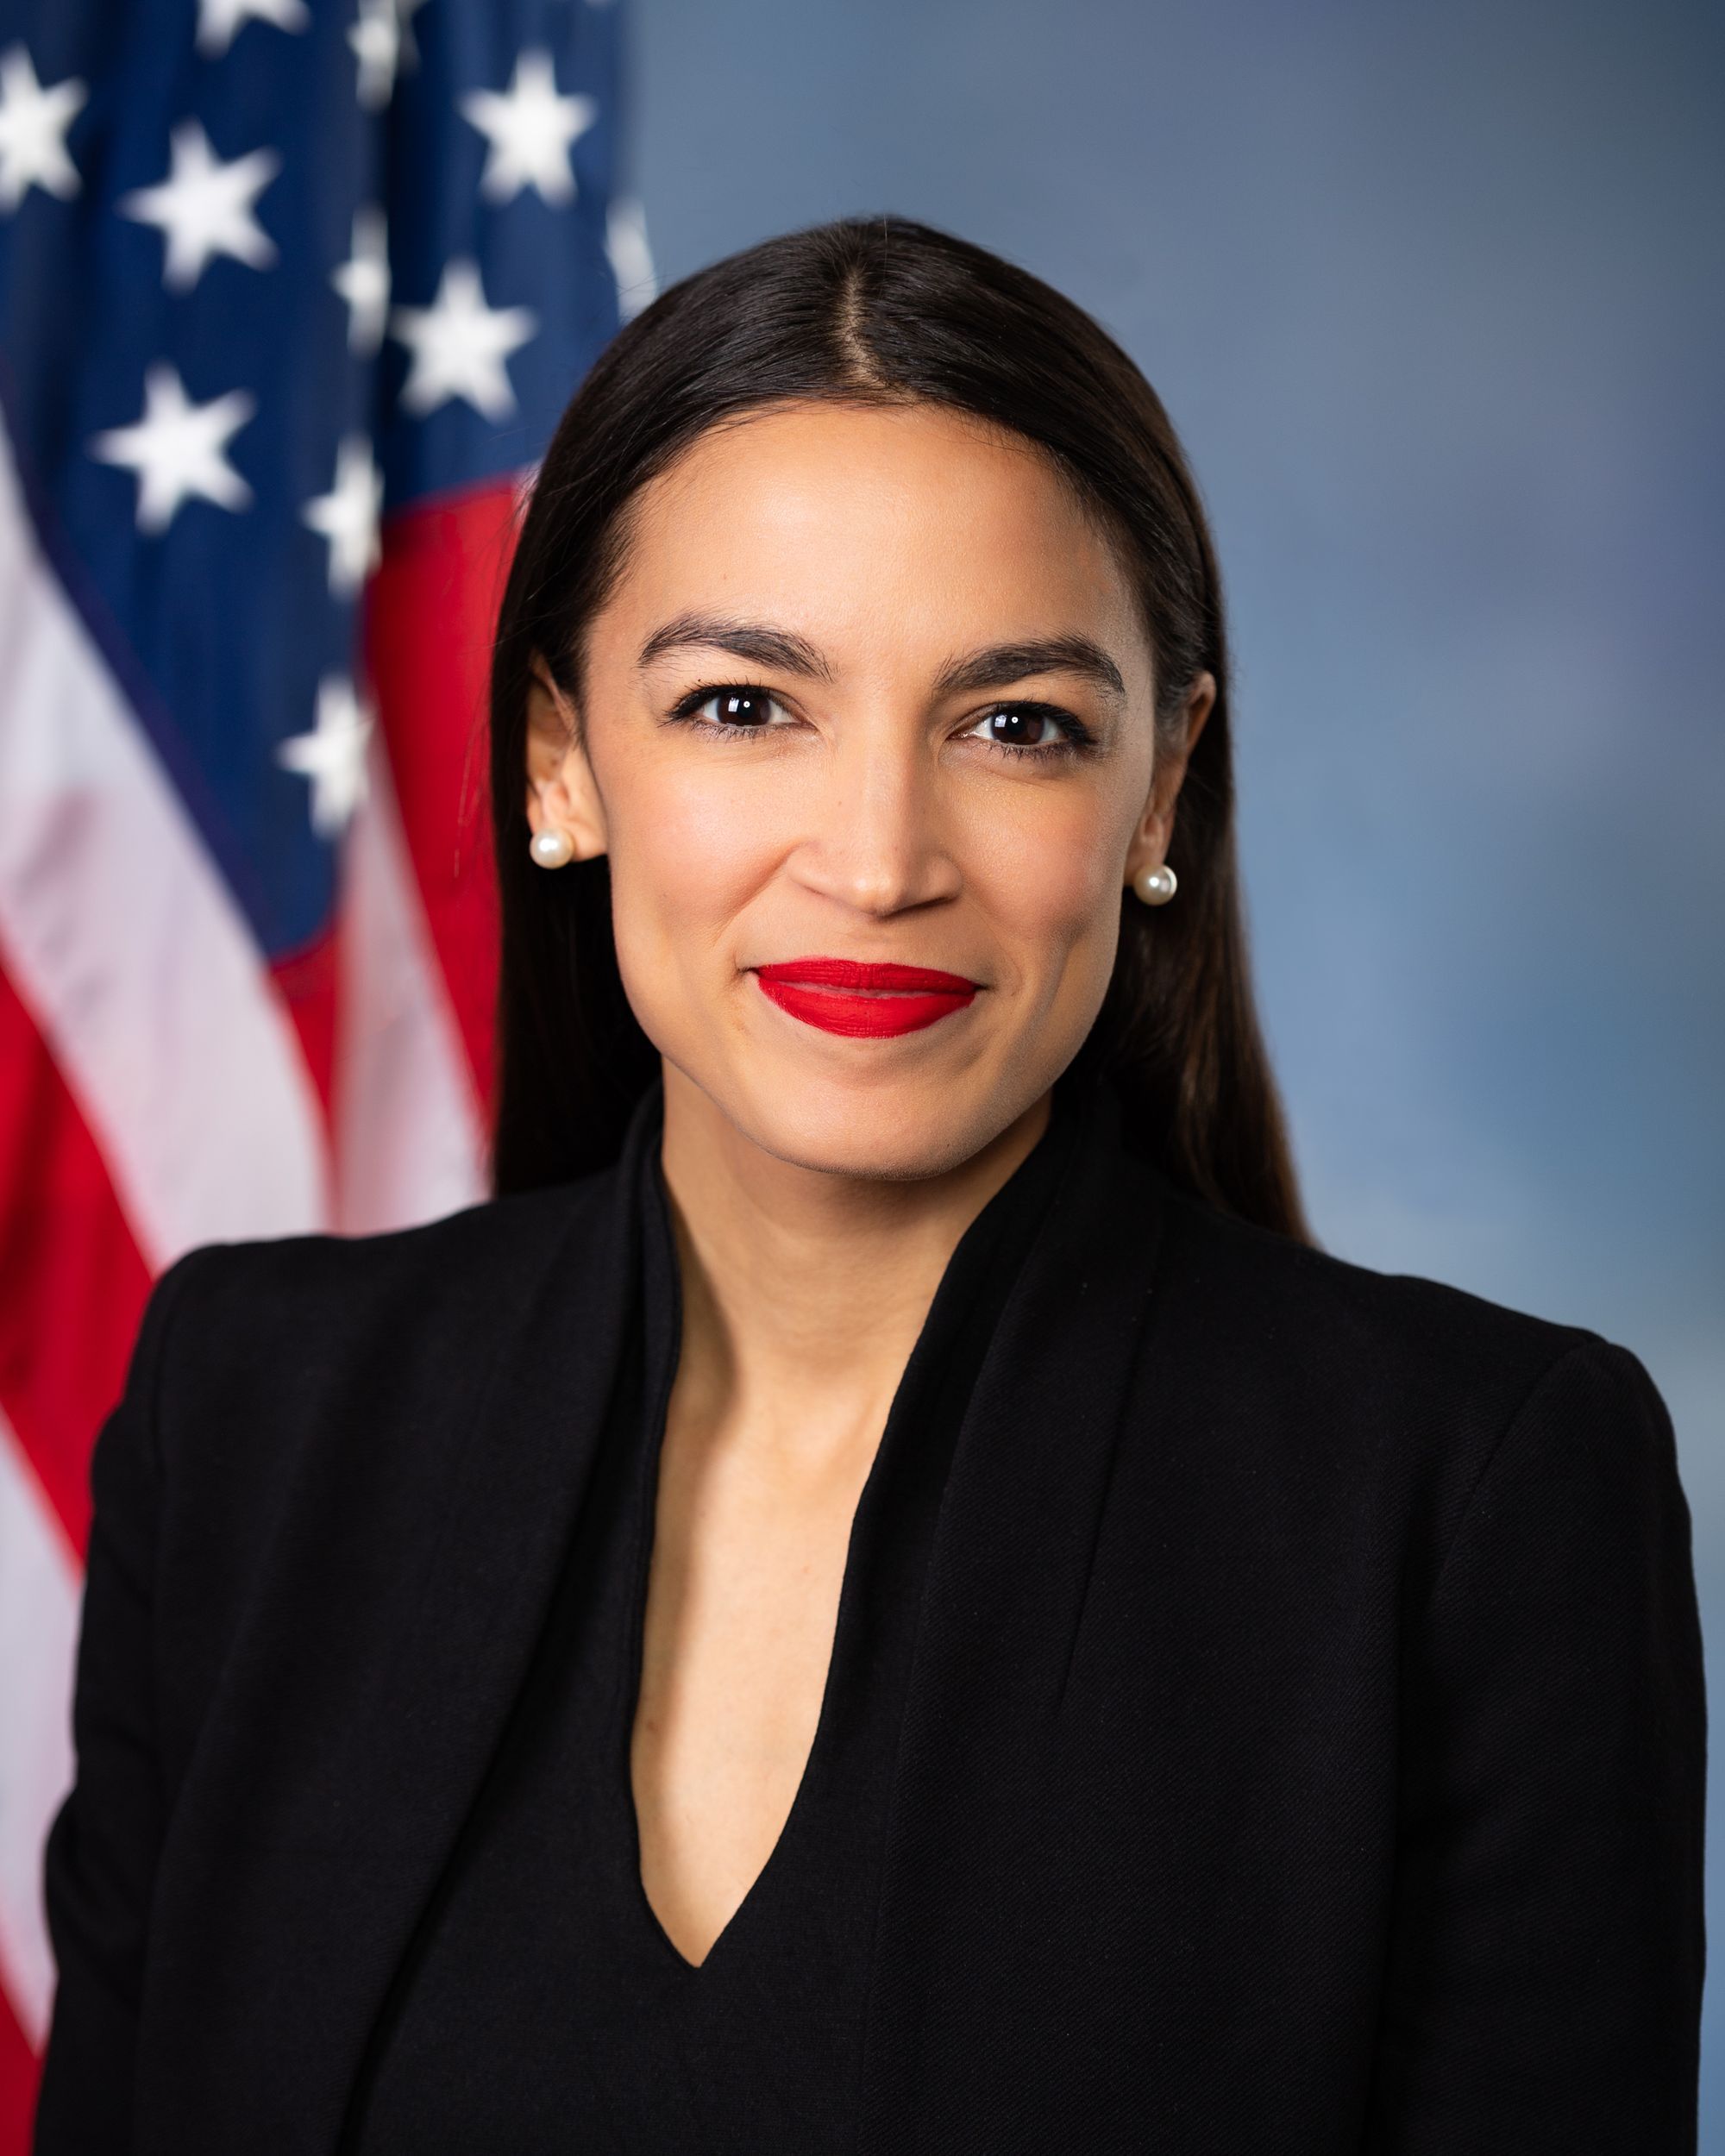 Majority Of Americans Back AOC’s 70% Marginal Tax Rate On Rich - Poll